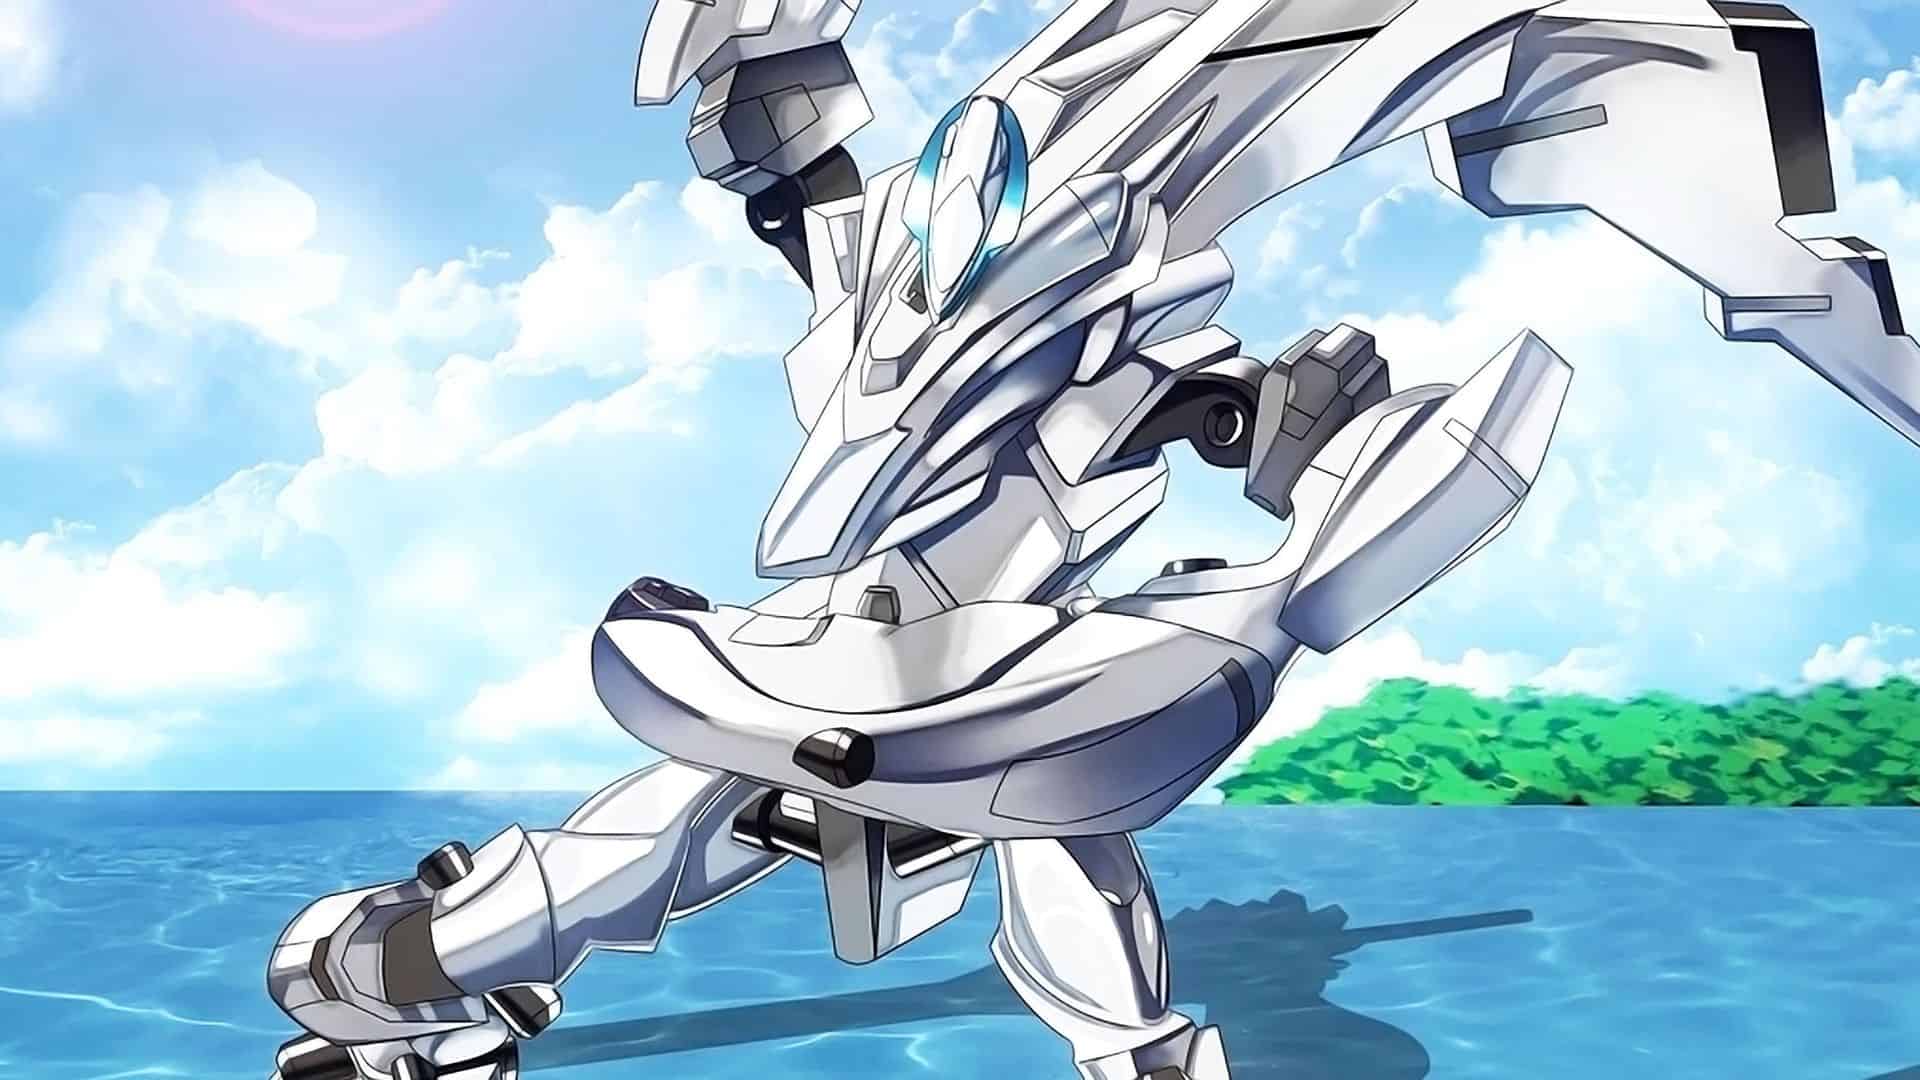 Fafner pilot in a still from the movie